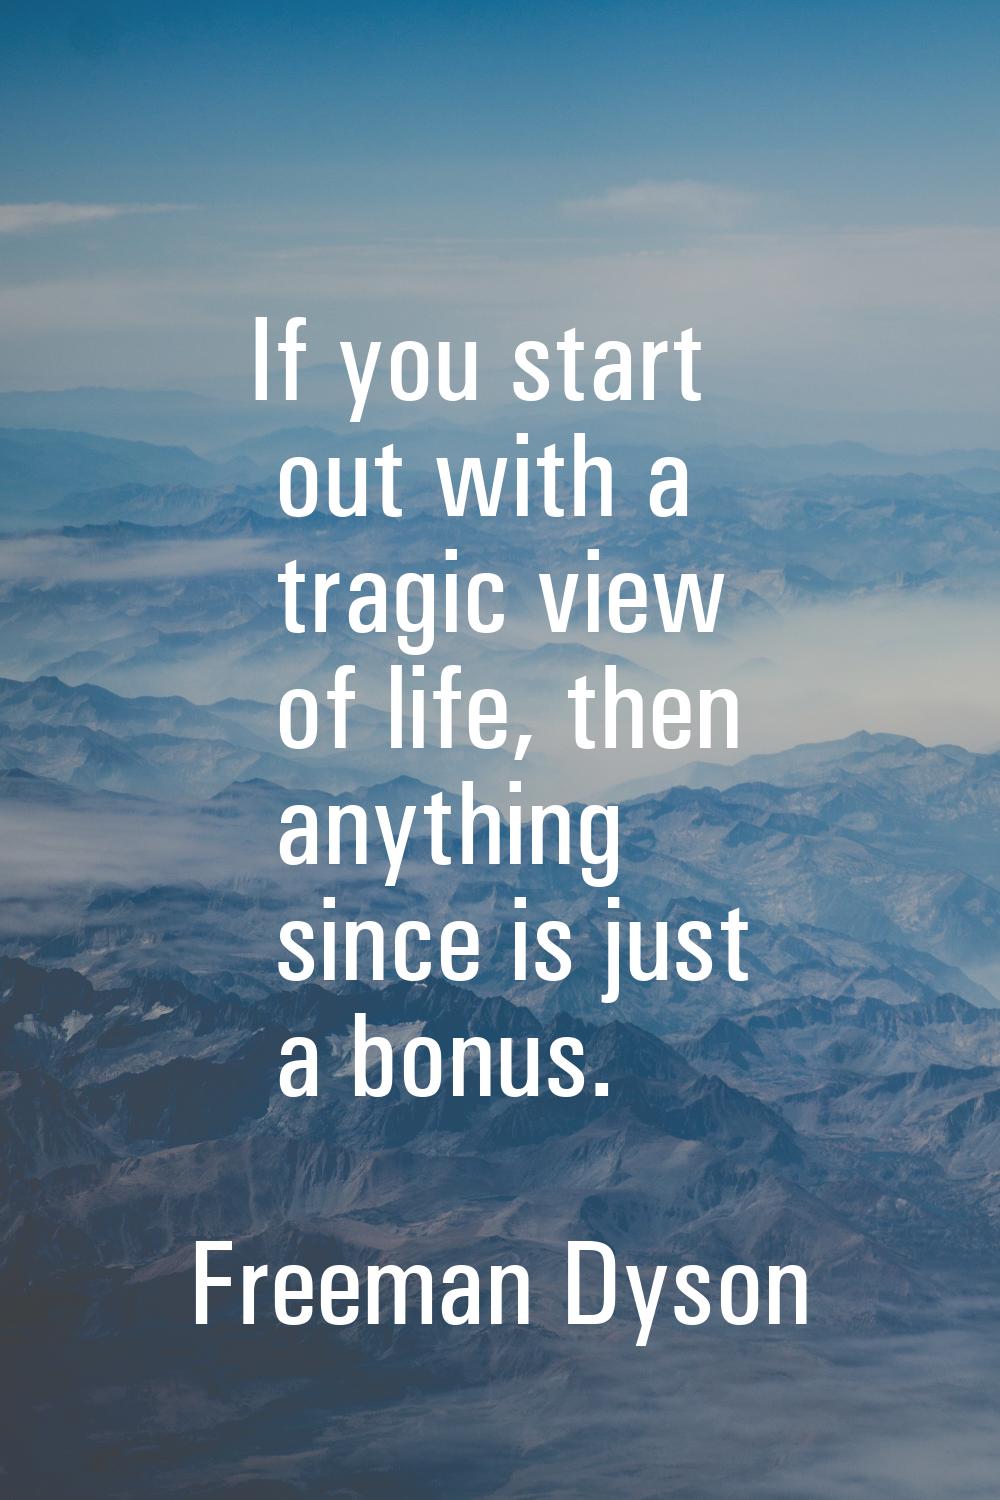 If you start out with a tragic view of life, then anything since is just a bonus.